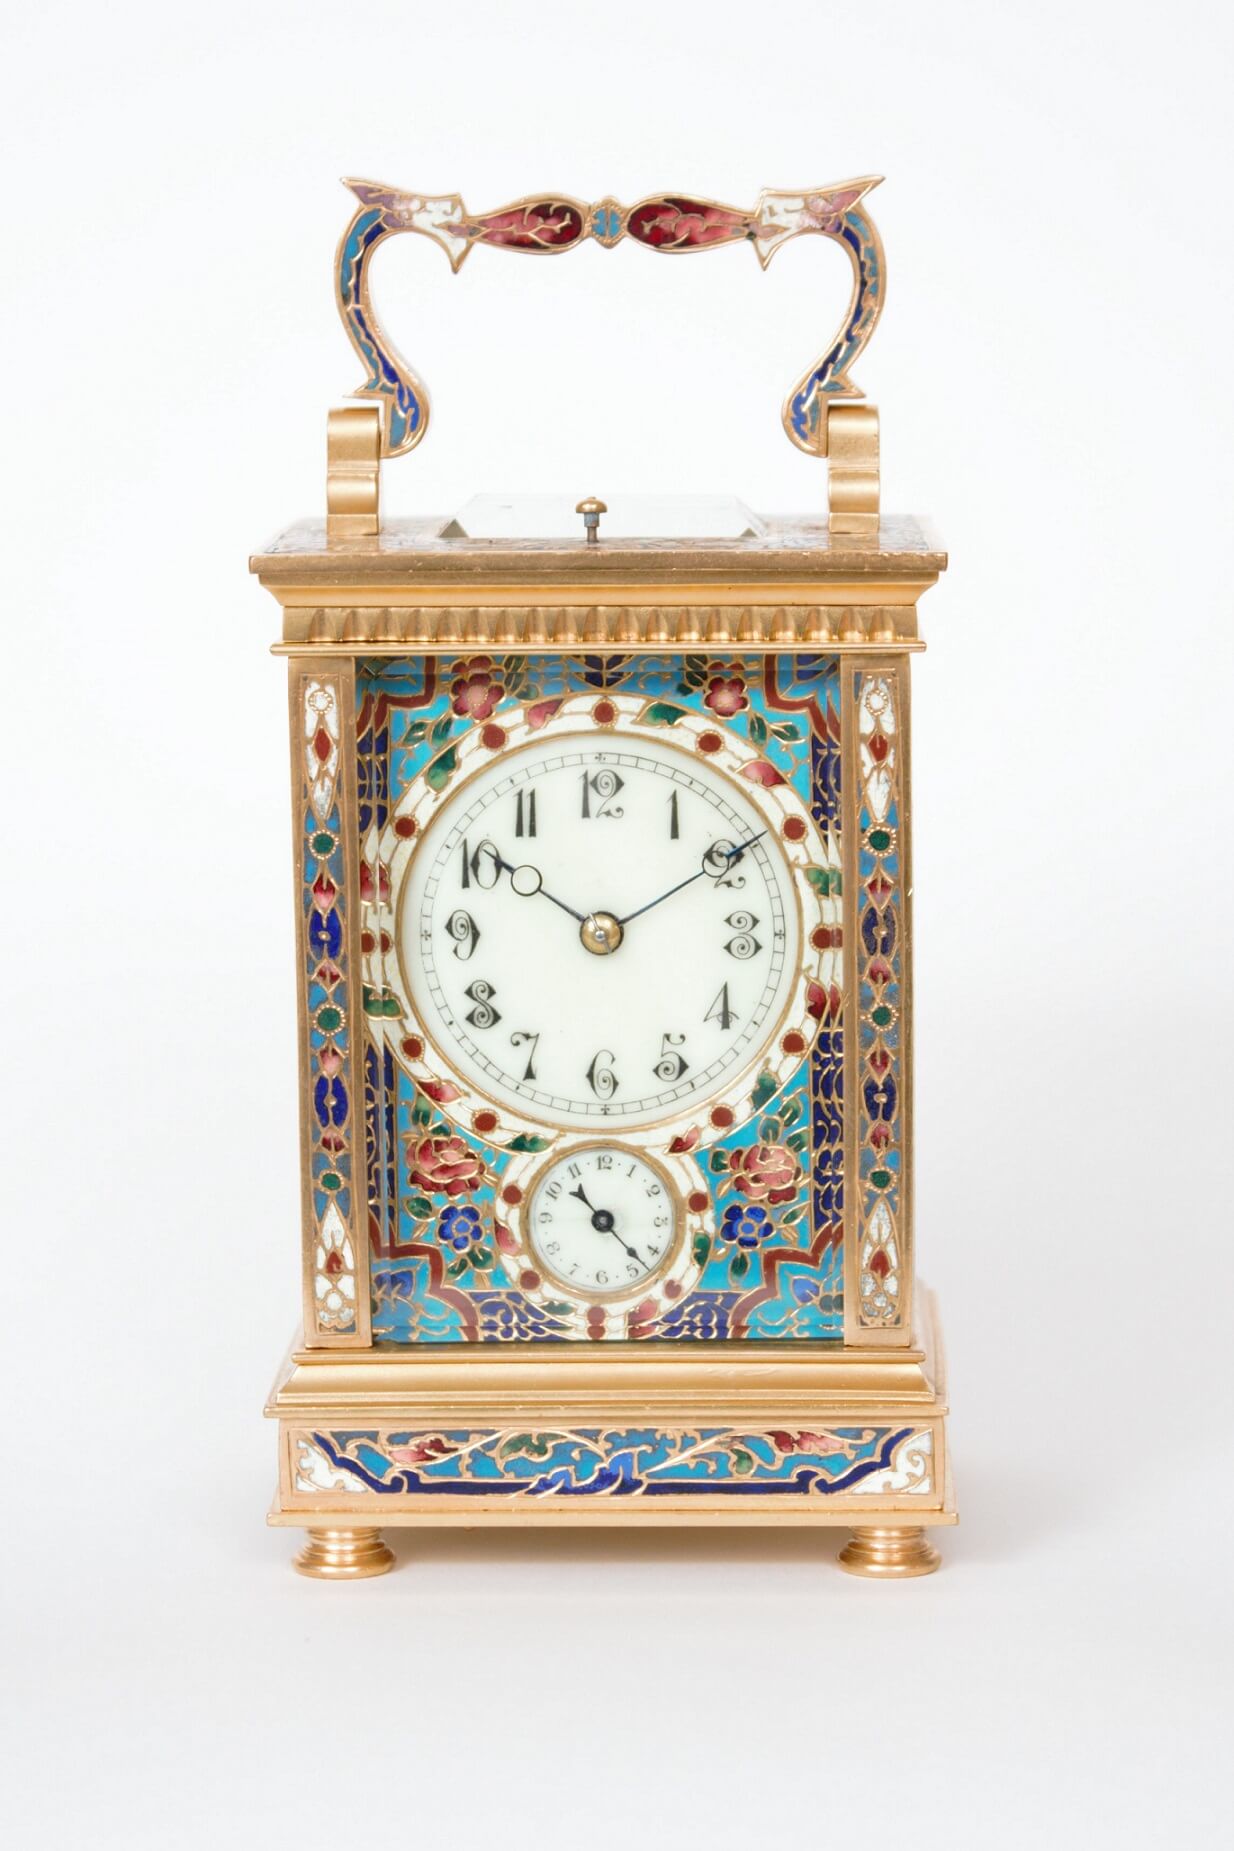 French-cloisonne-gilt-brass-antique-carriage-clock-travel-grande-sonnerie-enamel-repeating-